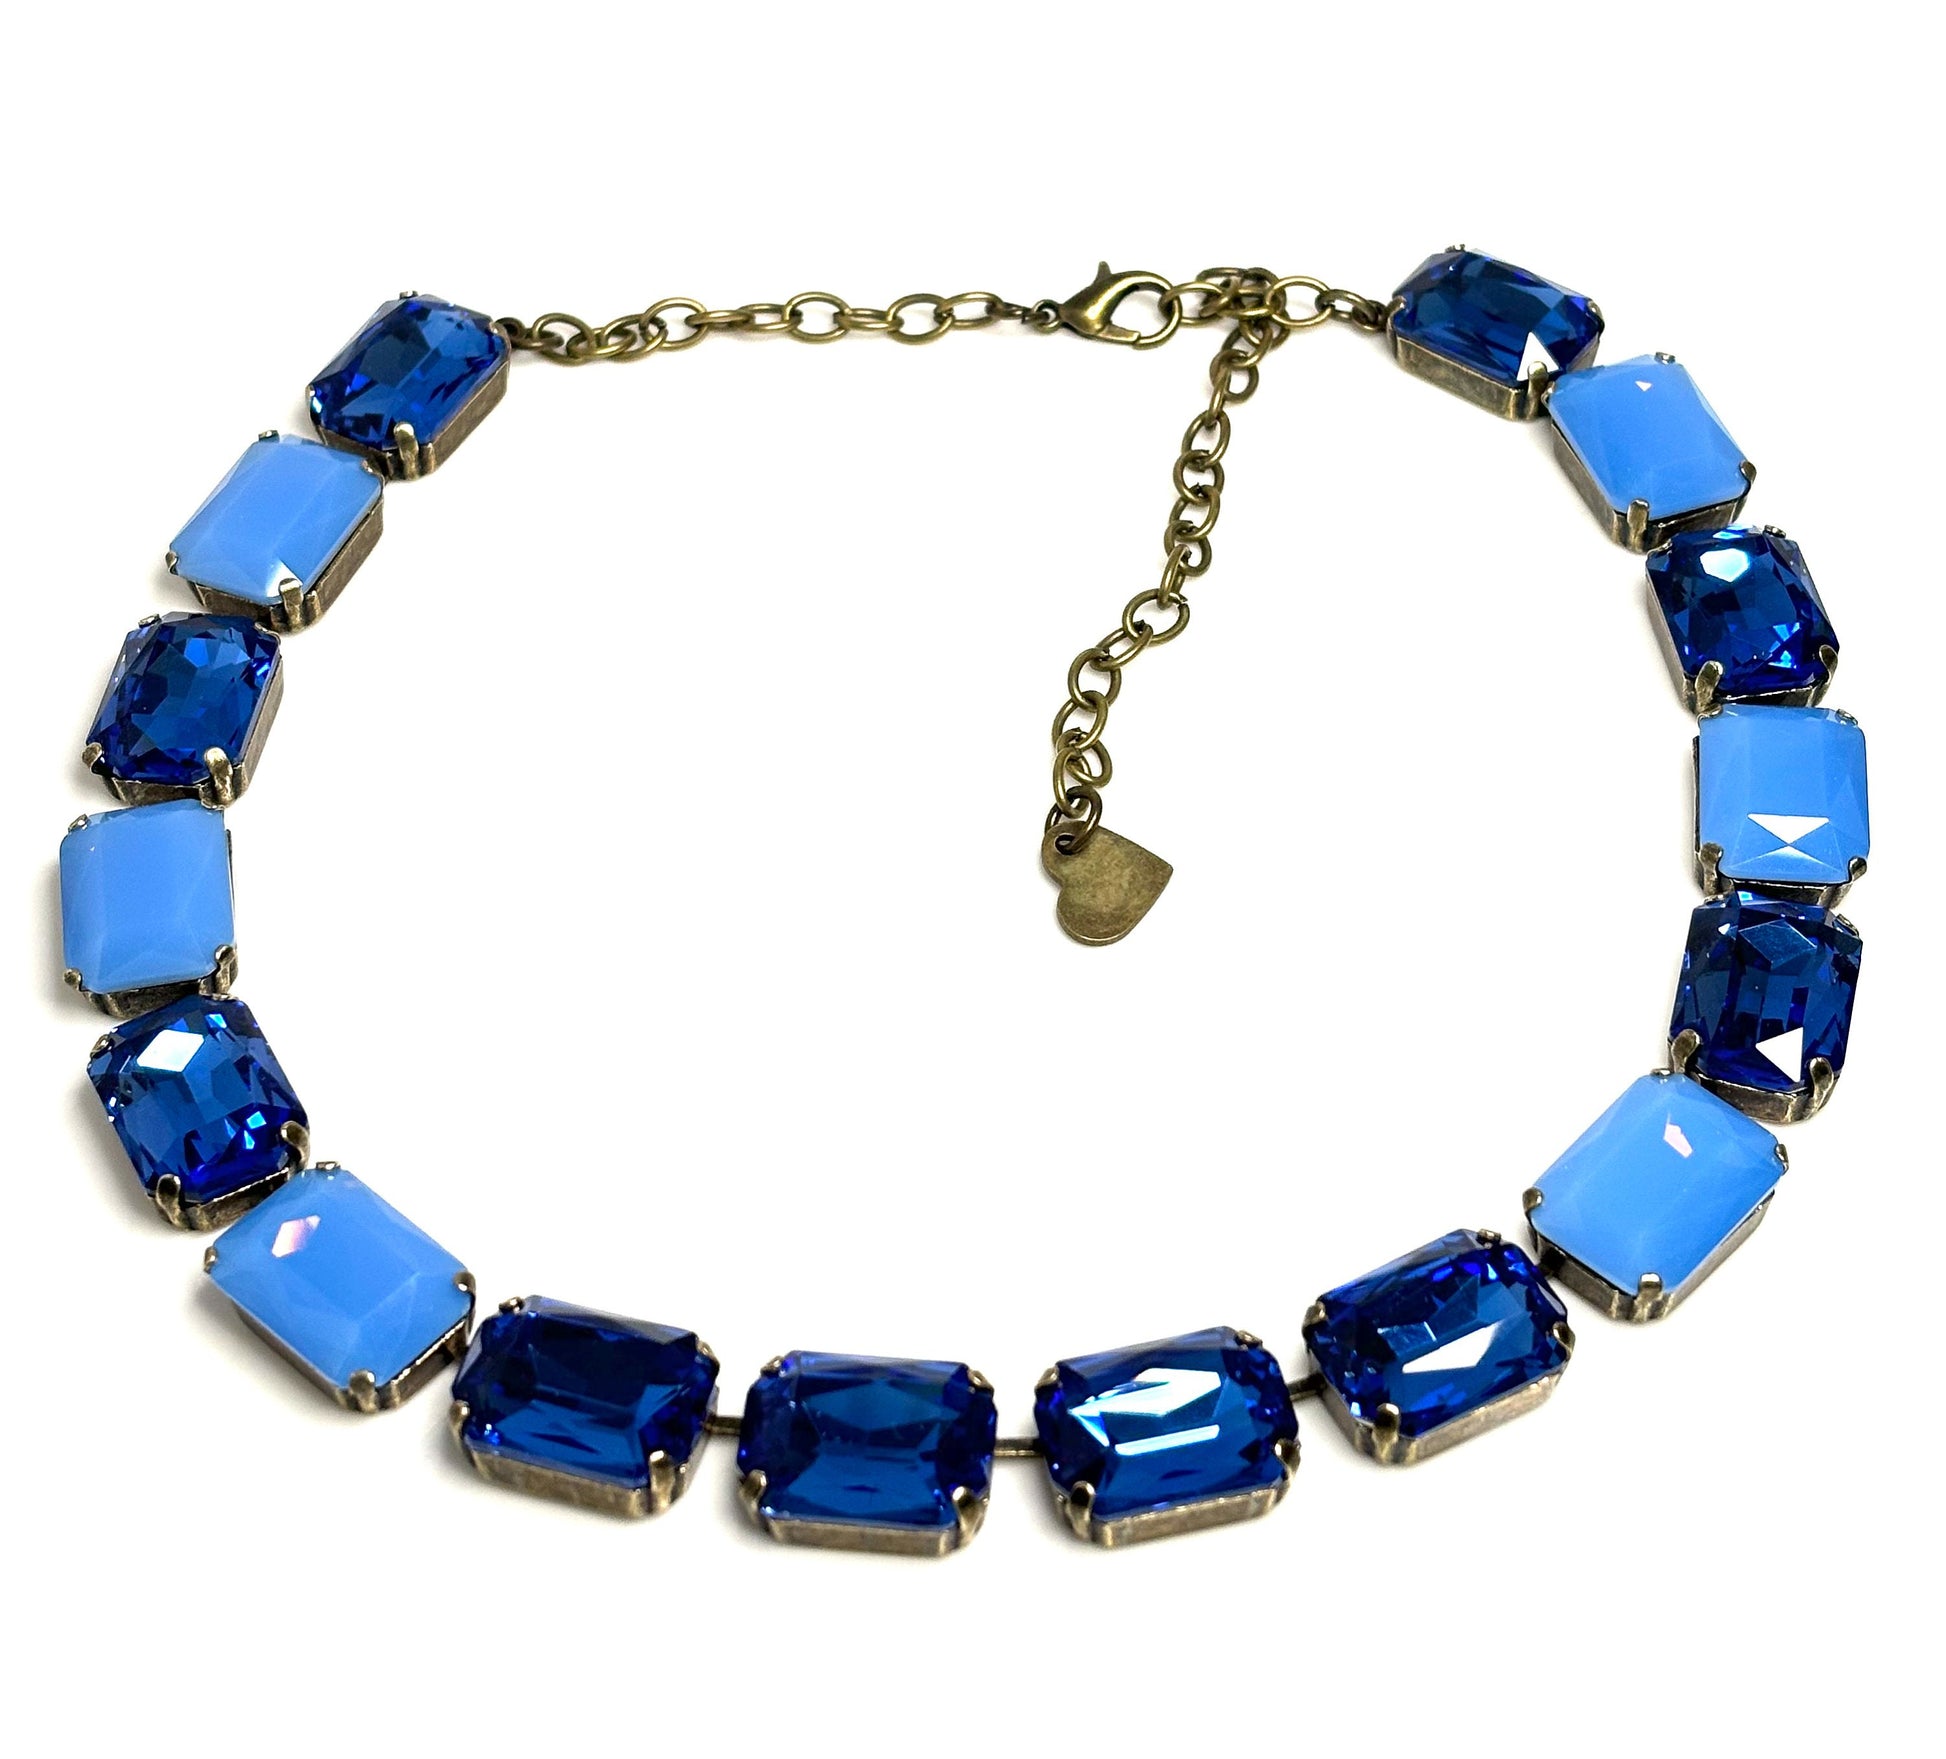 Sapphire Blue Opal Crystal Georgian Collet Necklace, Anna Wintour Style, Blue Crystal Choker, Riviere Necklace, Statement Choker for Women